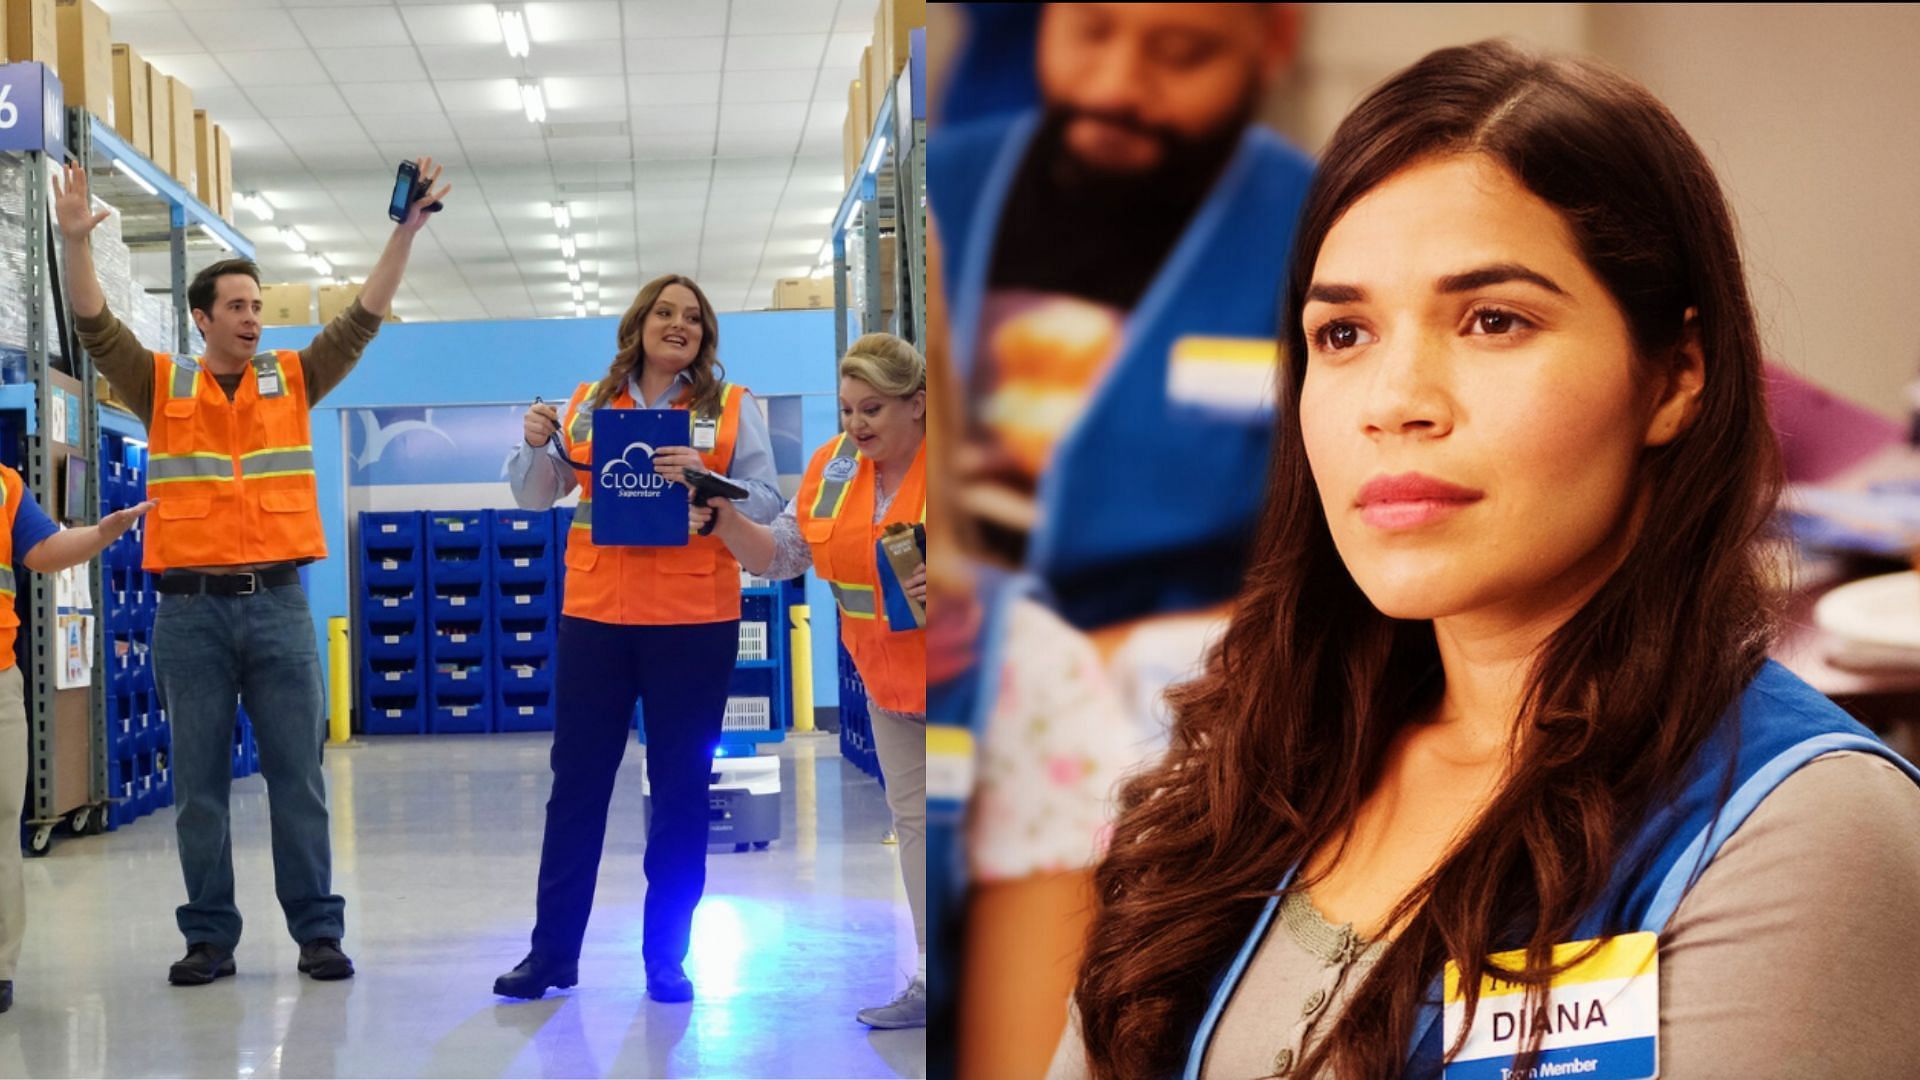  Clip from Superstore 